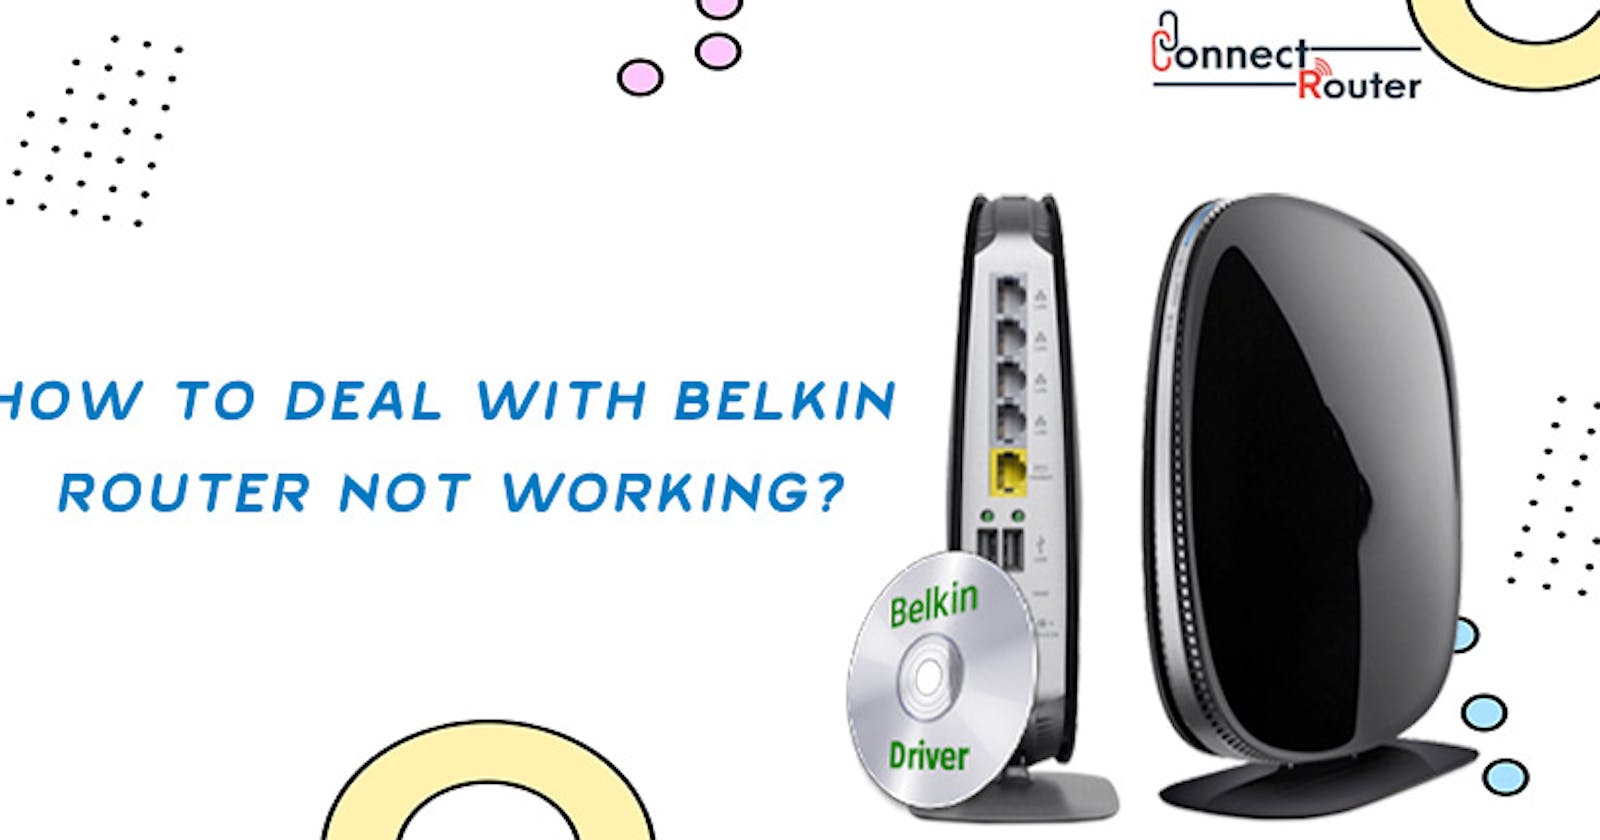 How to Deal with Belkin Router Not Working?